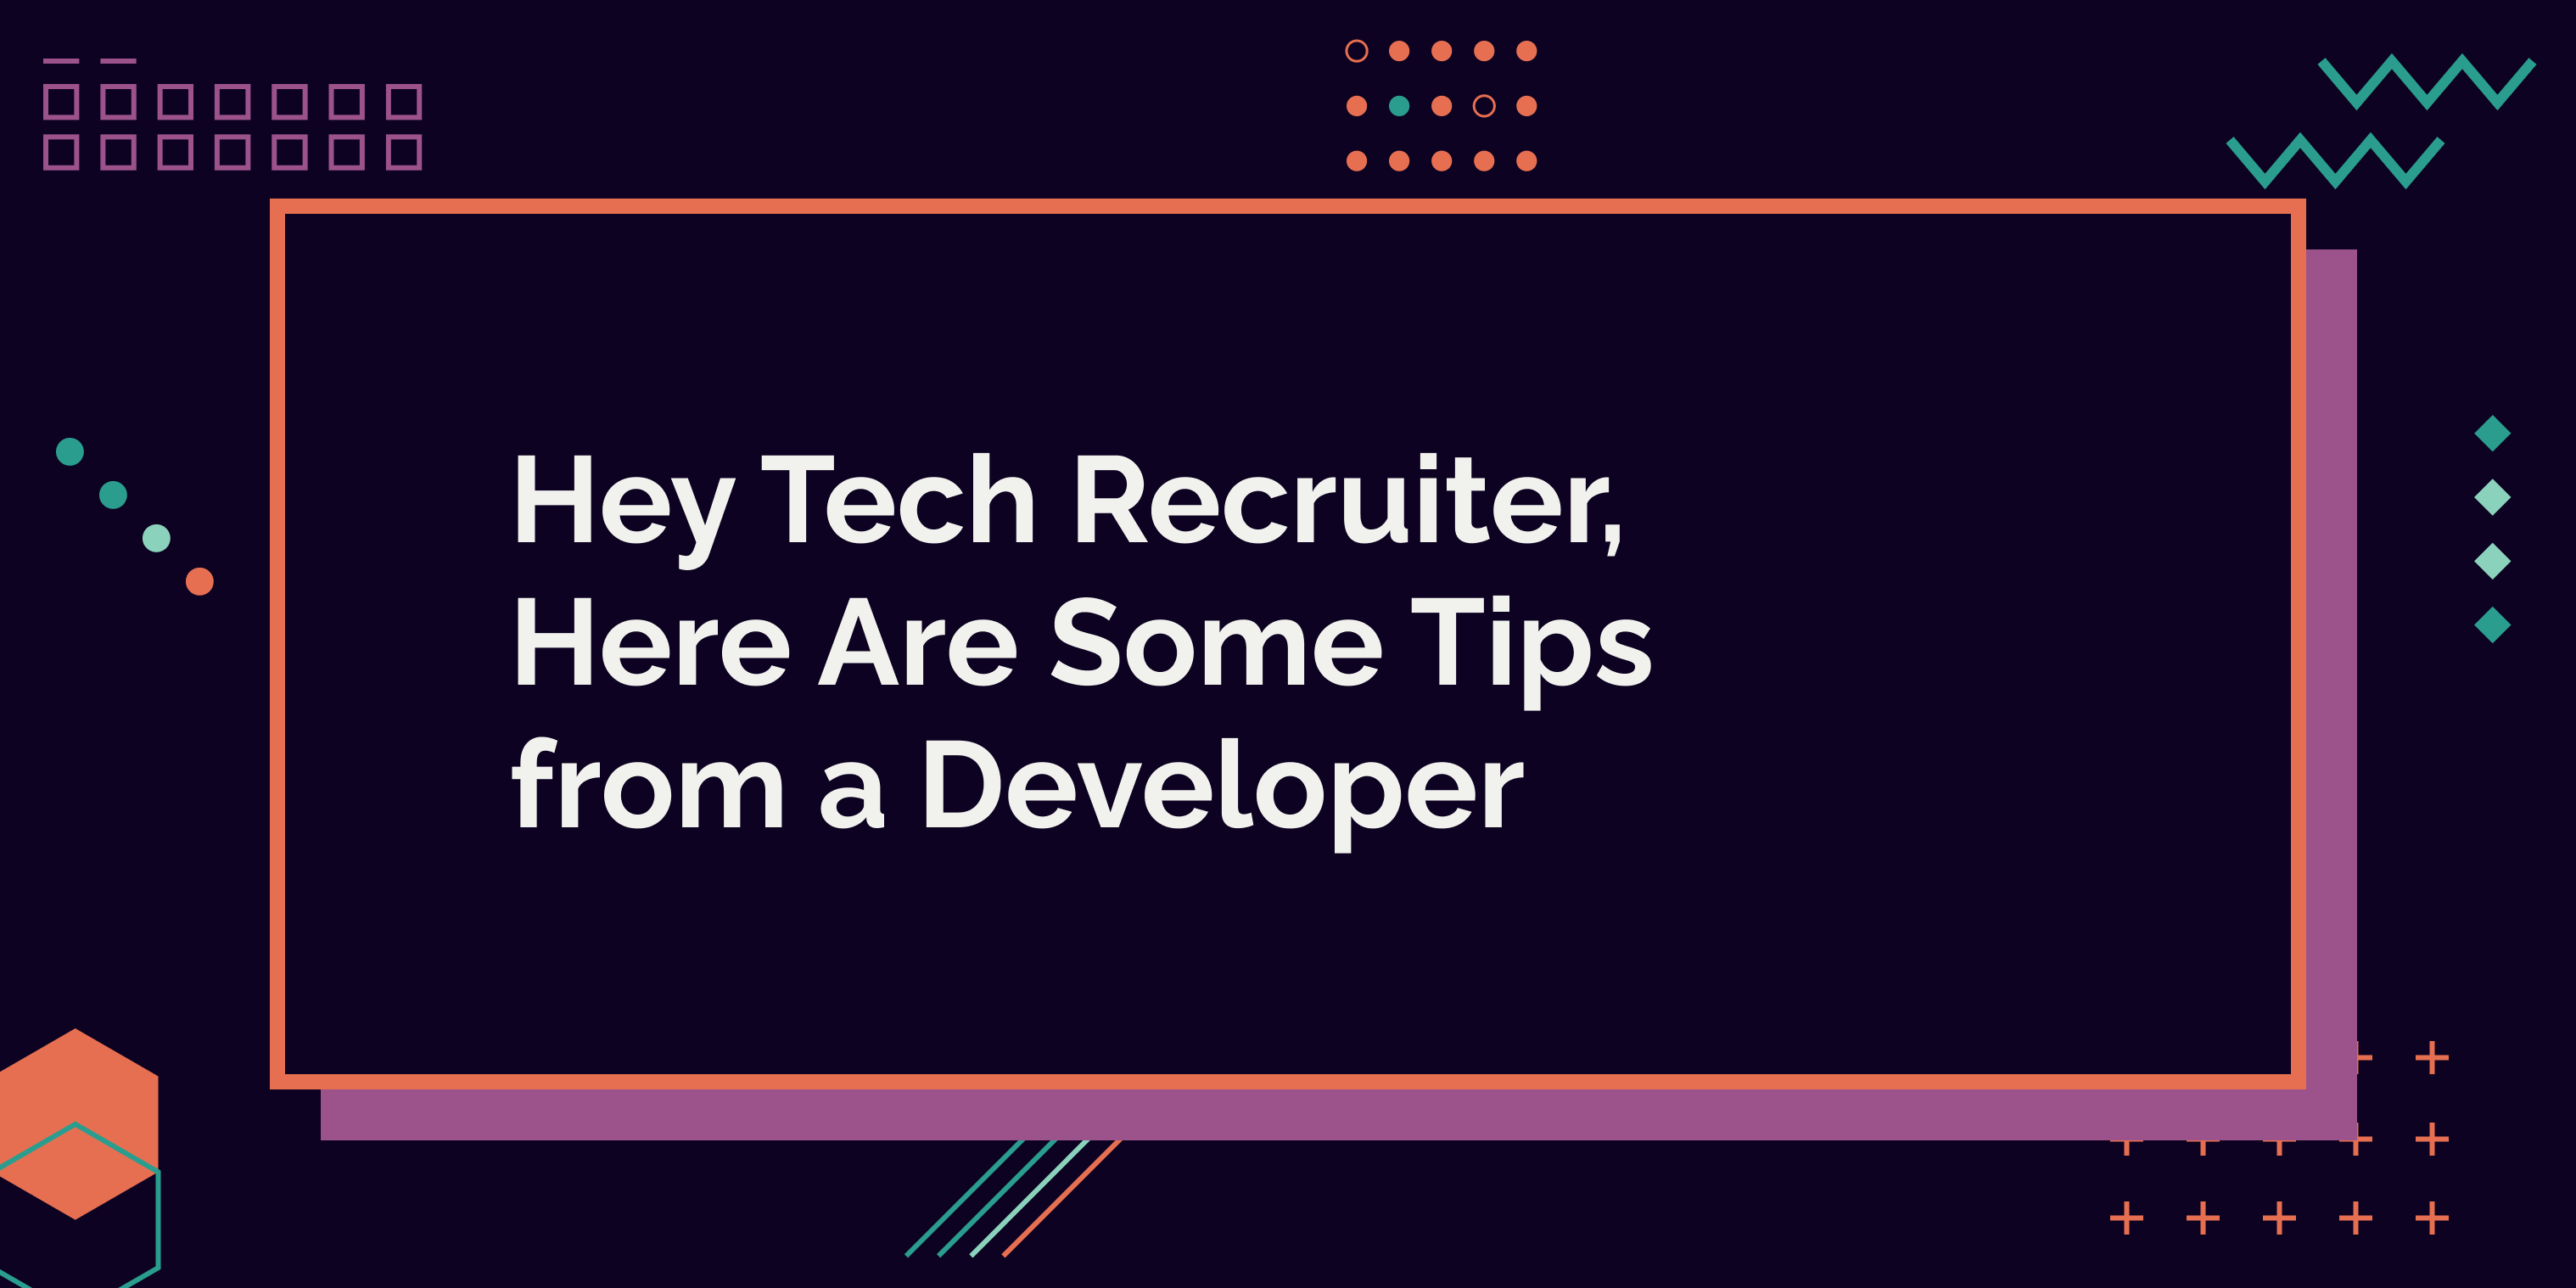 Hey Tech Recruiter, Here Are Some Tips from a Developer